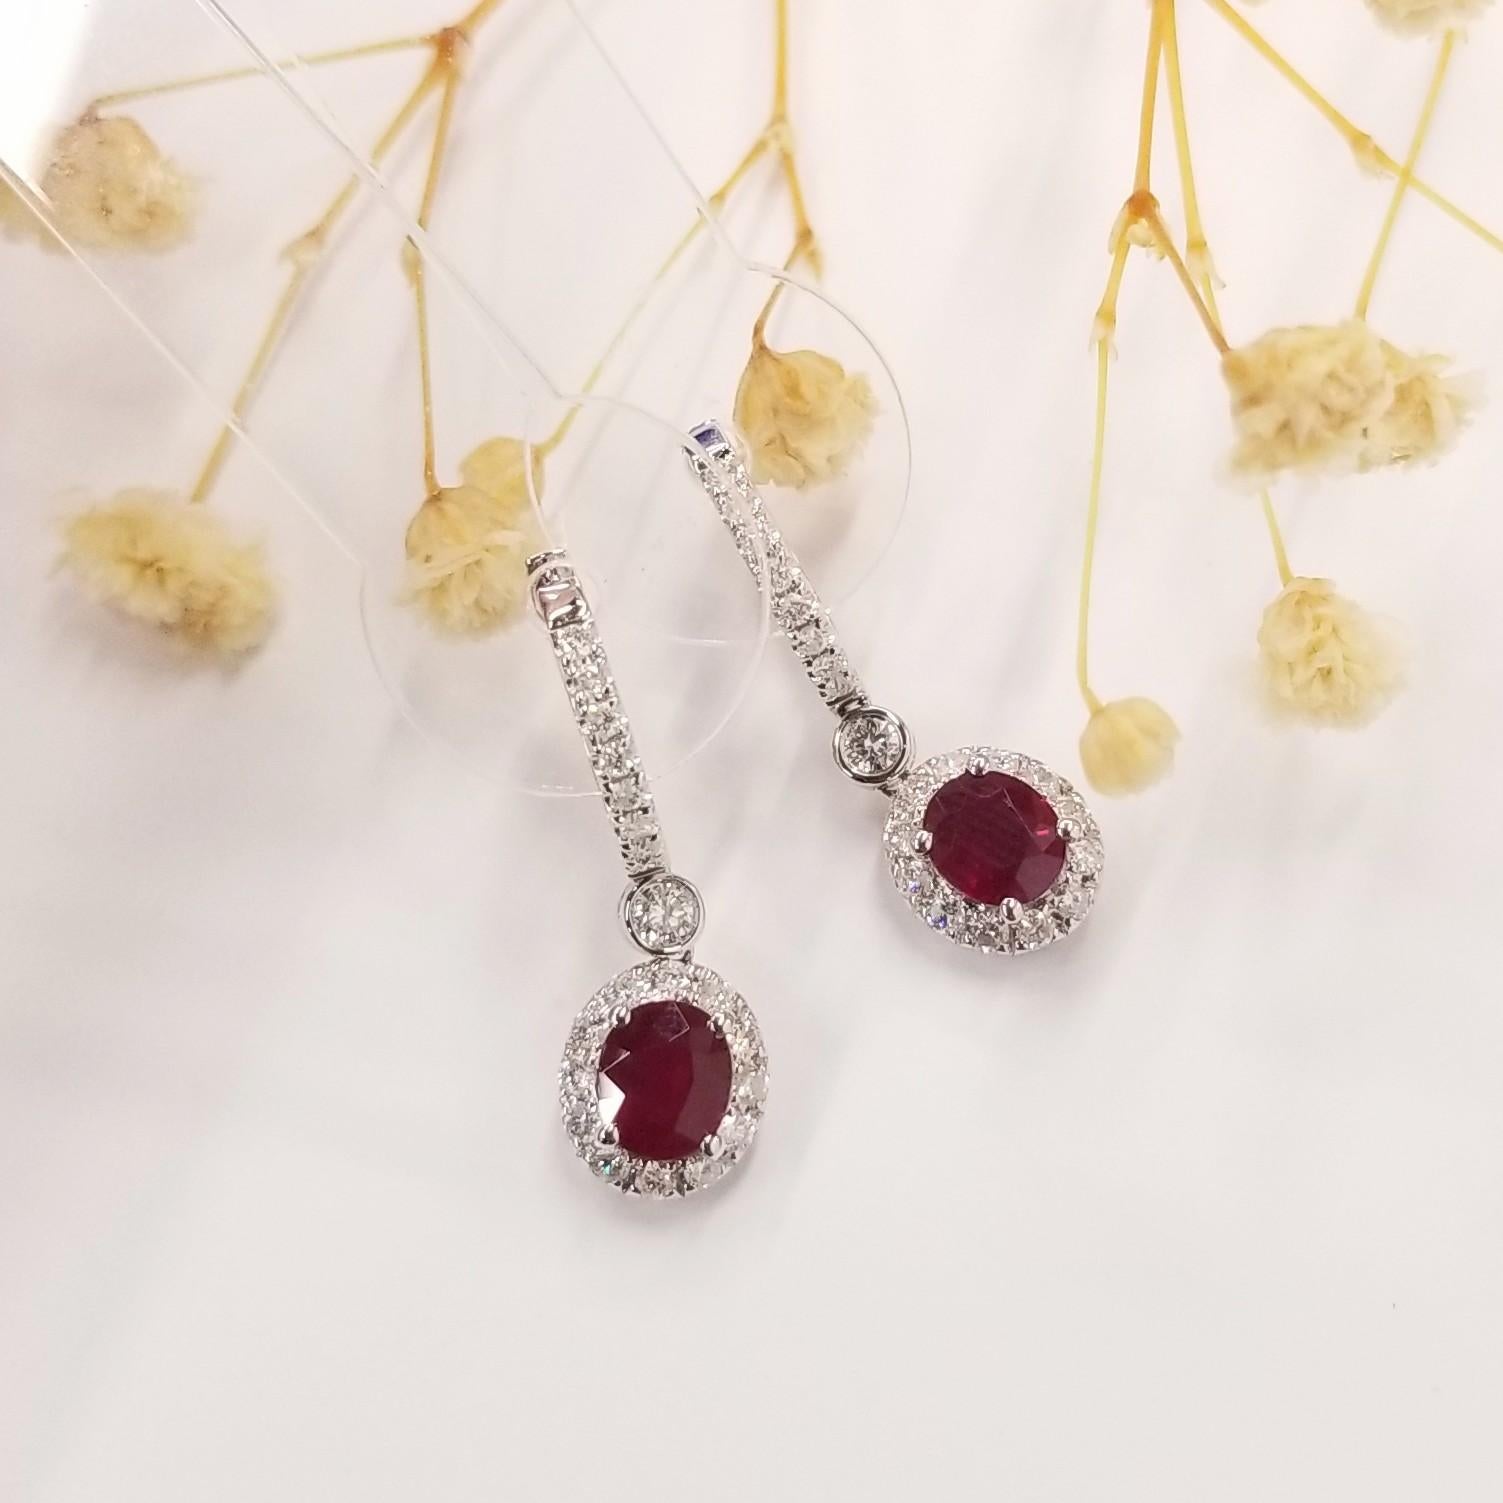 Introducing a captivating pair of IGI Certified 1.58 Carat Ruby Dangle Earrings, a truly mesmerizing composition that showcases the beauty of natural rubies and diamonds. Encased in 18K White Gold, these earrings are adorned with a deep red